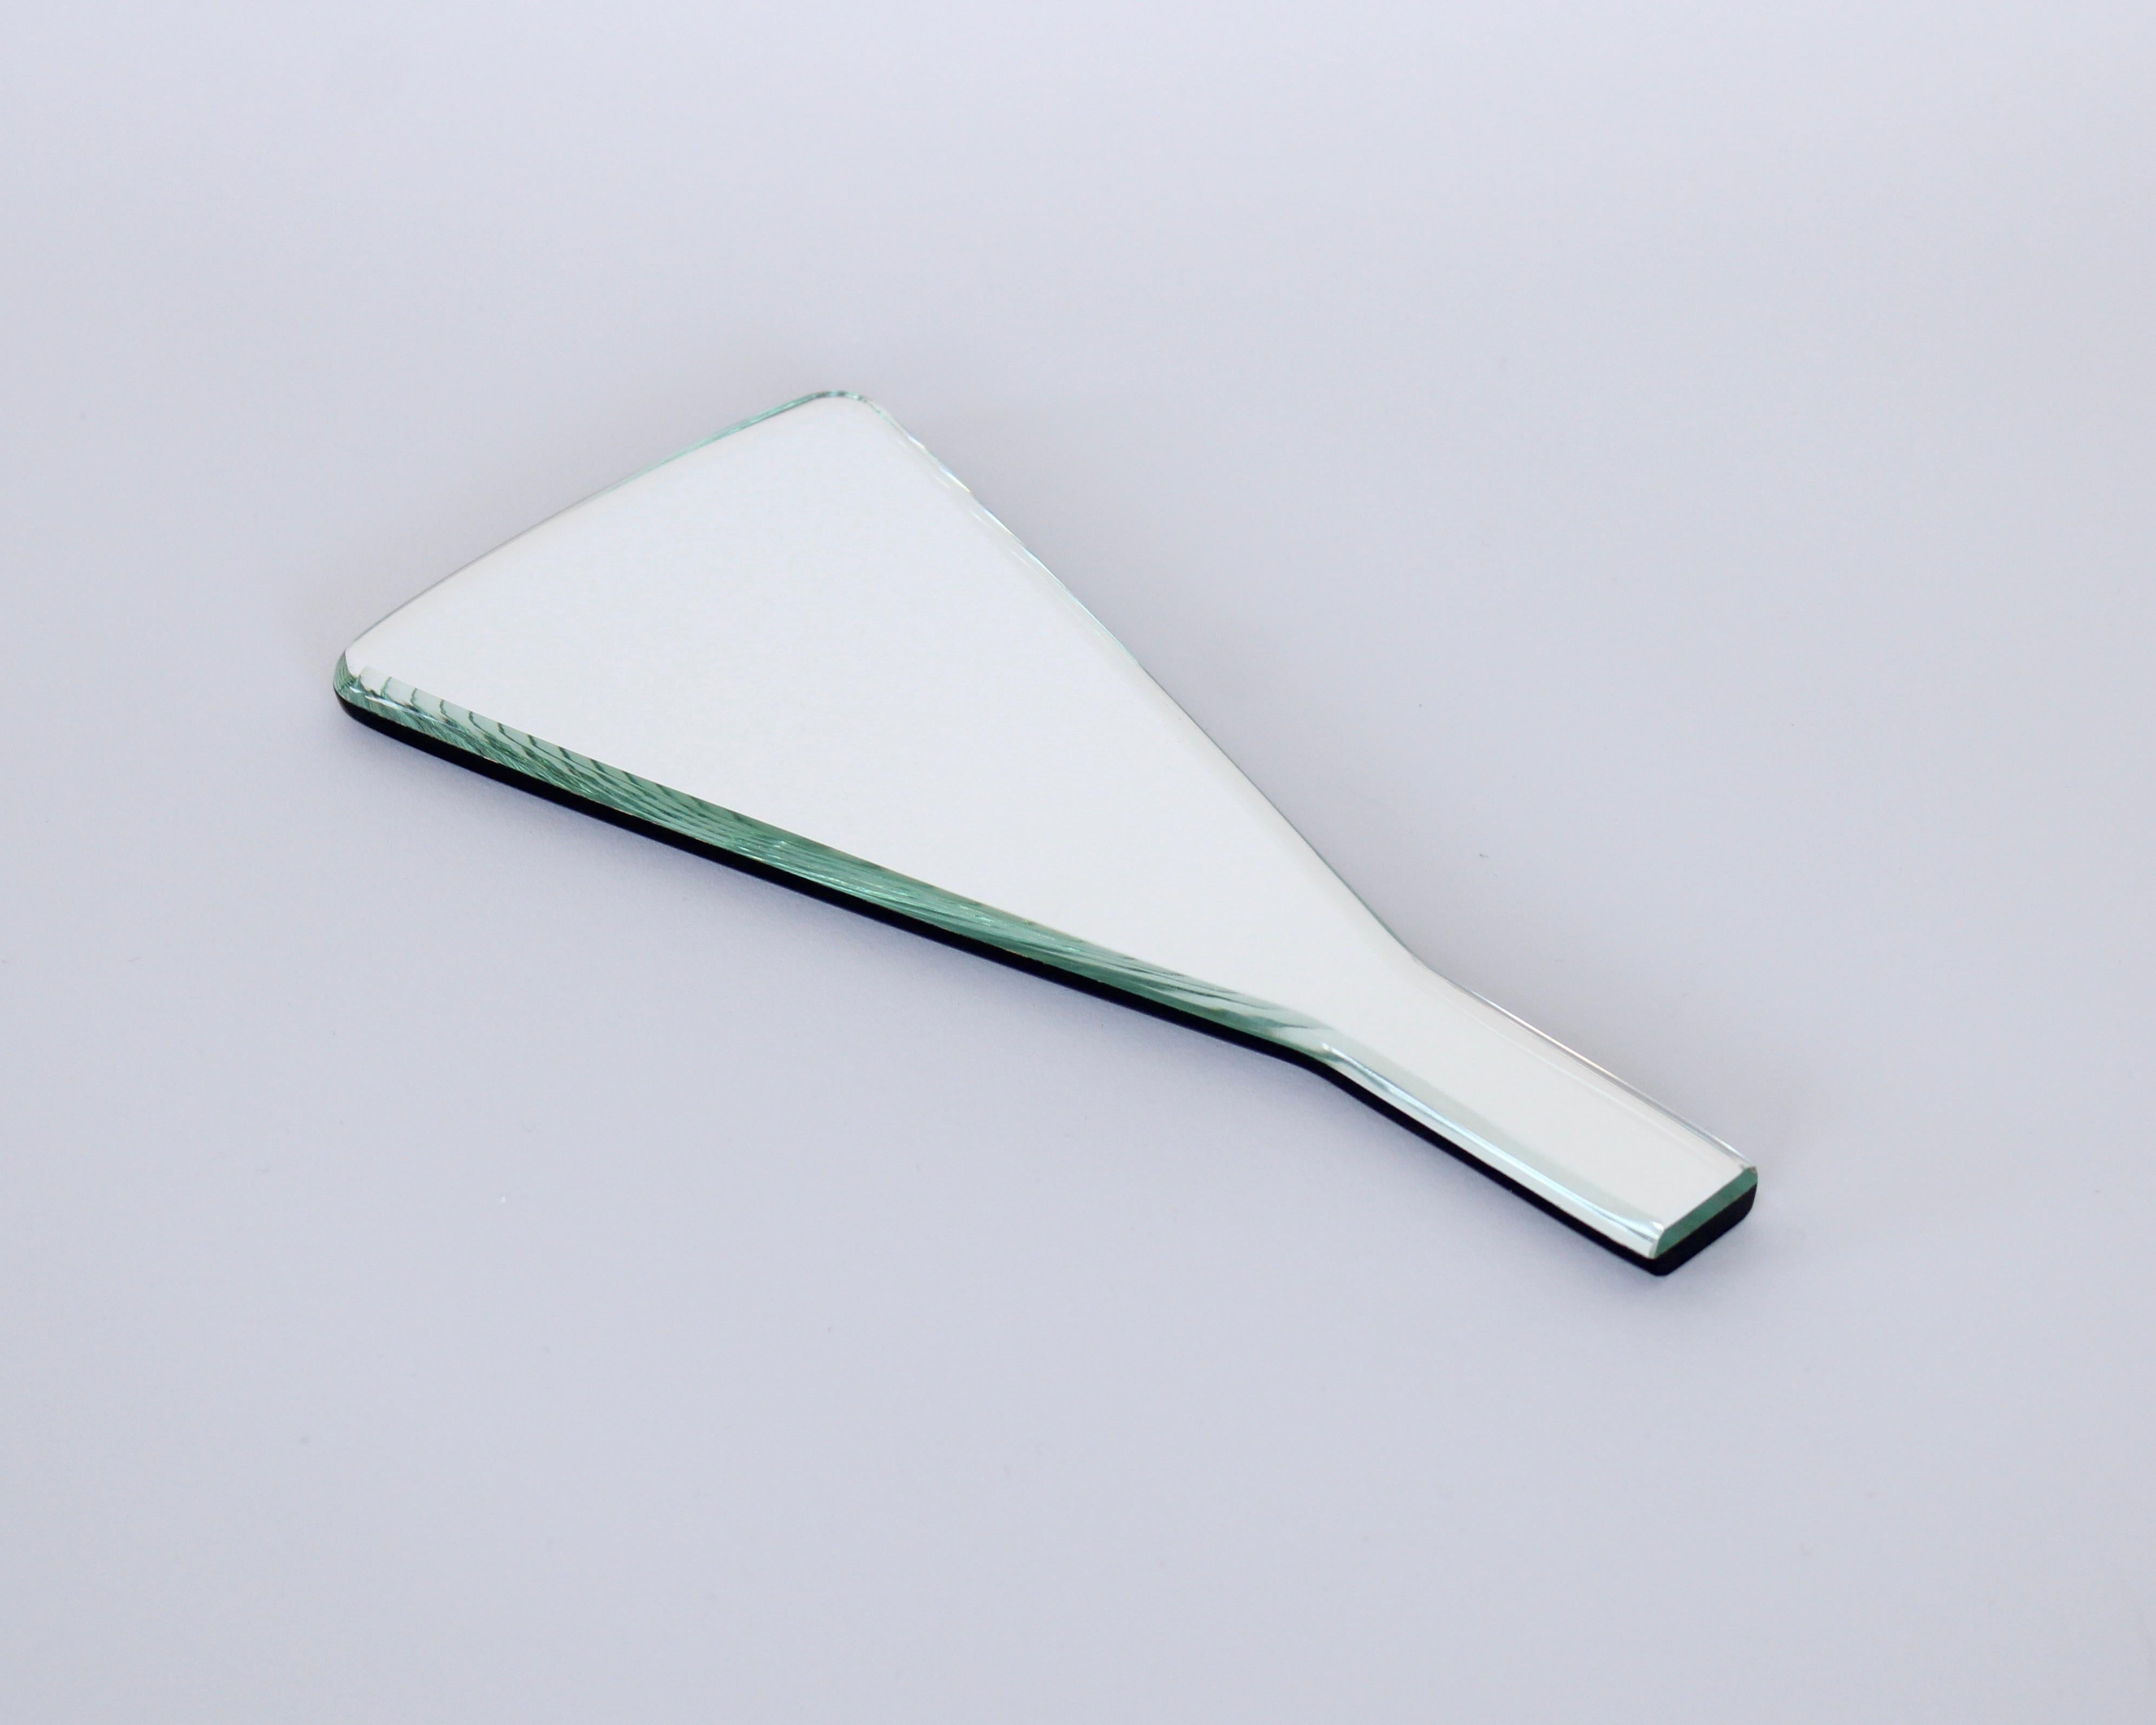 A hand mirror, model number 2032, designed by Gio Ponti for Fontana Arte with beveled glass edges and black glass backing. Comes with original box and certificate of authenticity.
Model number 2032, 31 of 899. 
Designed in 1932, this example most